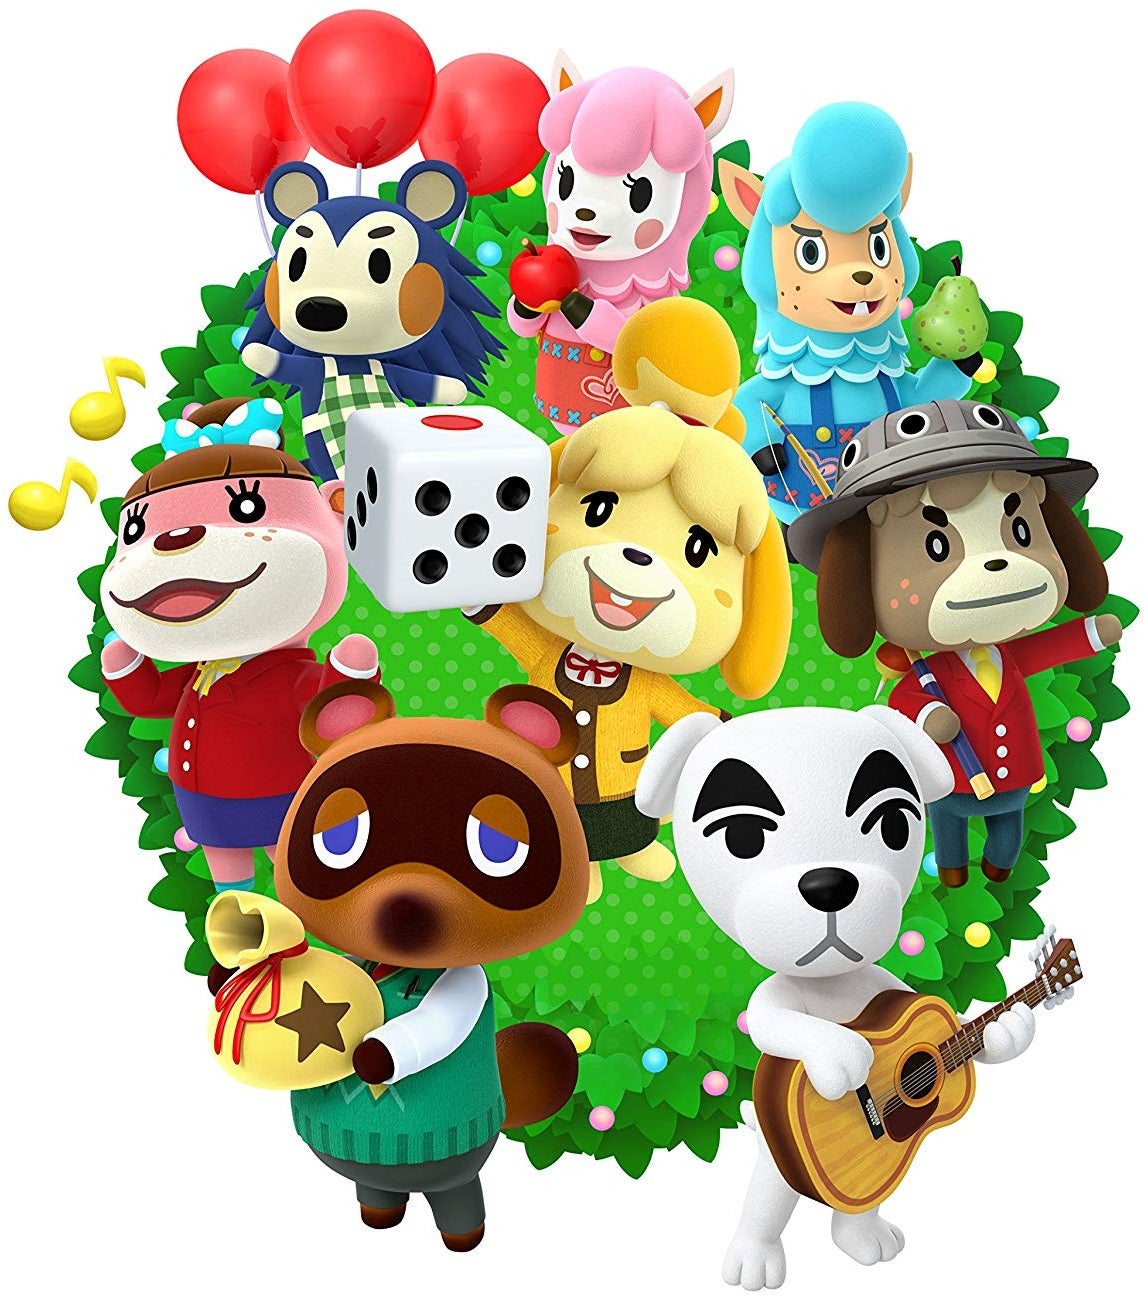 Nintendo Animal Crossing: New Leaf - Welcome Amiibo Cards - Sanrio Collaboration Pack